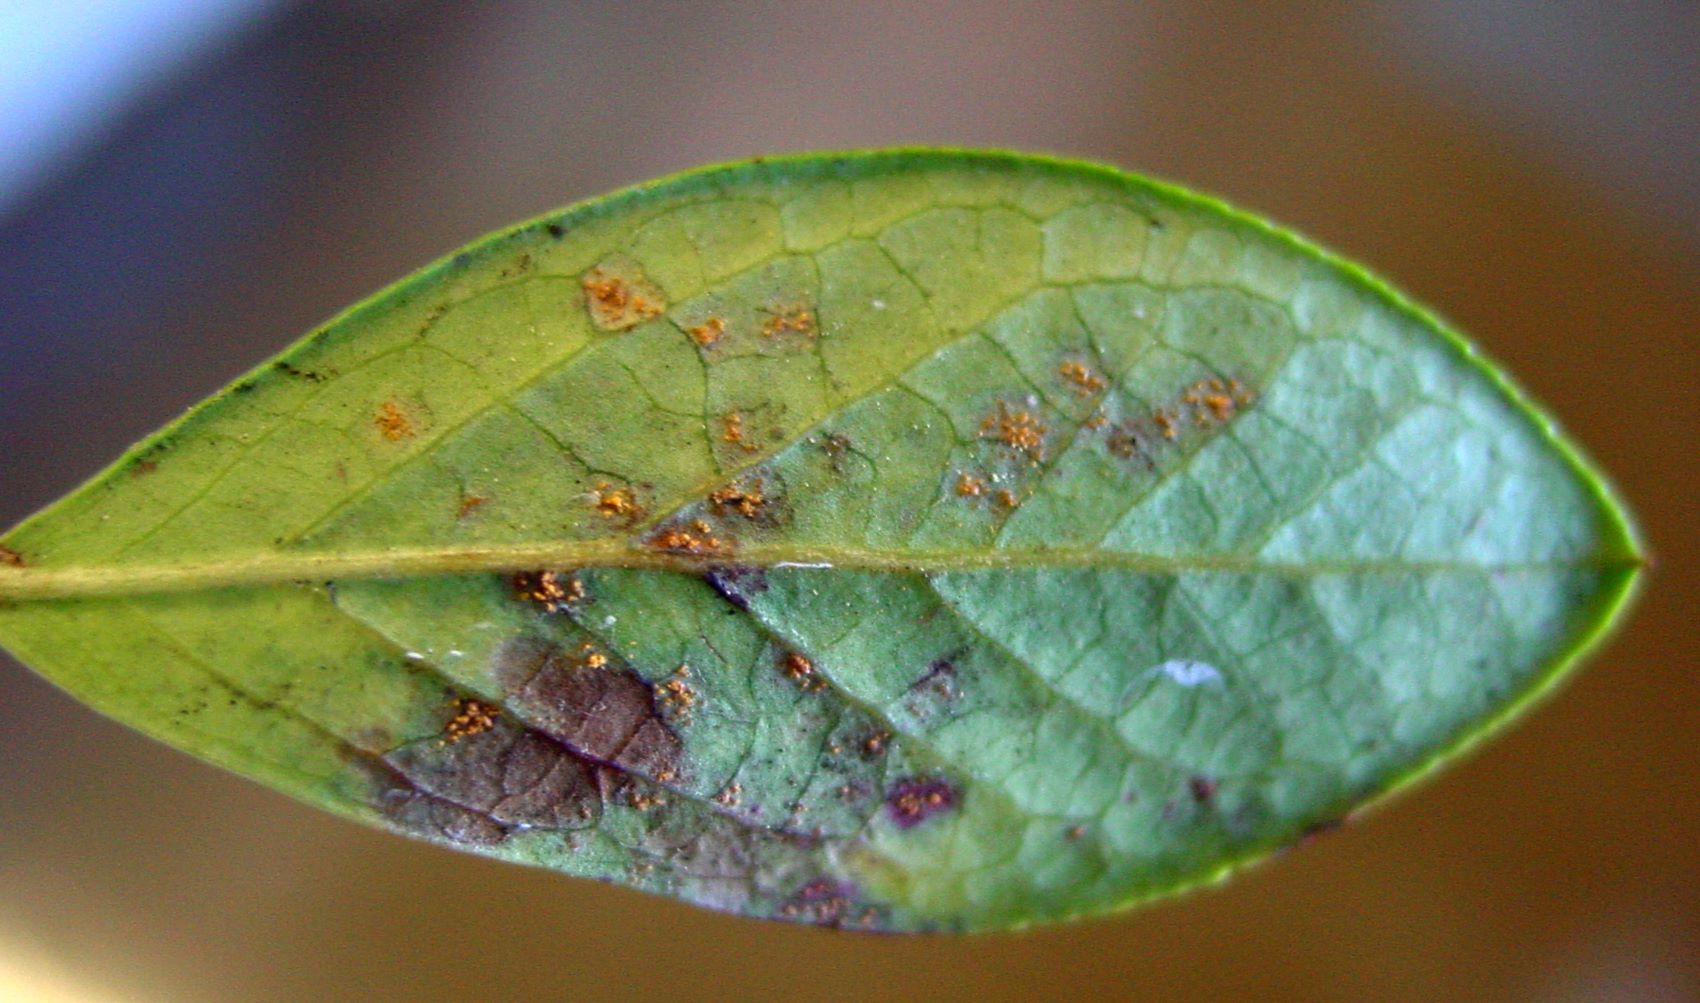 Thumbnail for Crop protectants for blueberry rust | Tasmanian Institute of Agriculture